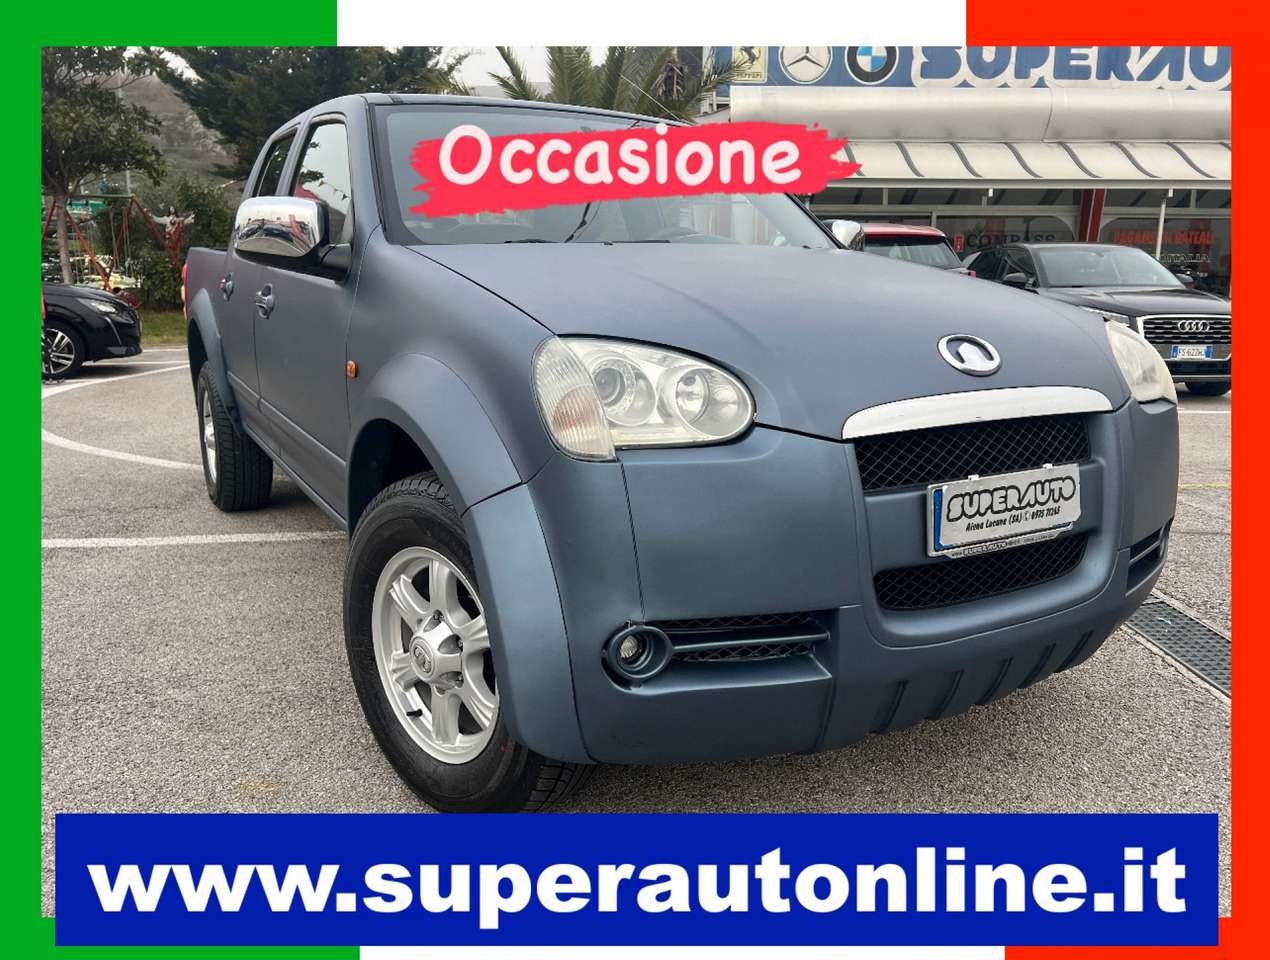 Great Wall Steed DC 2.4 DOPPIA CABINA PICK UP Luxury